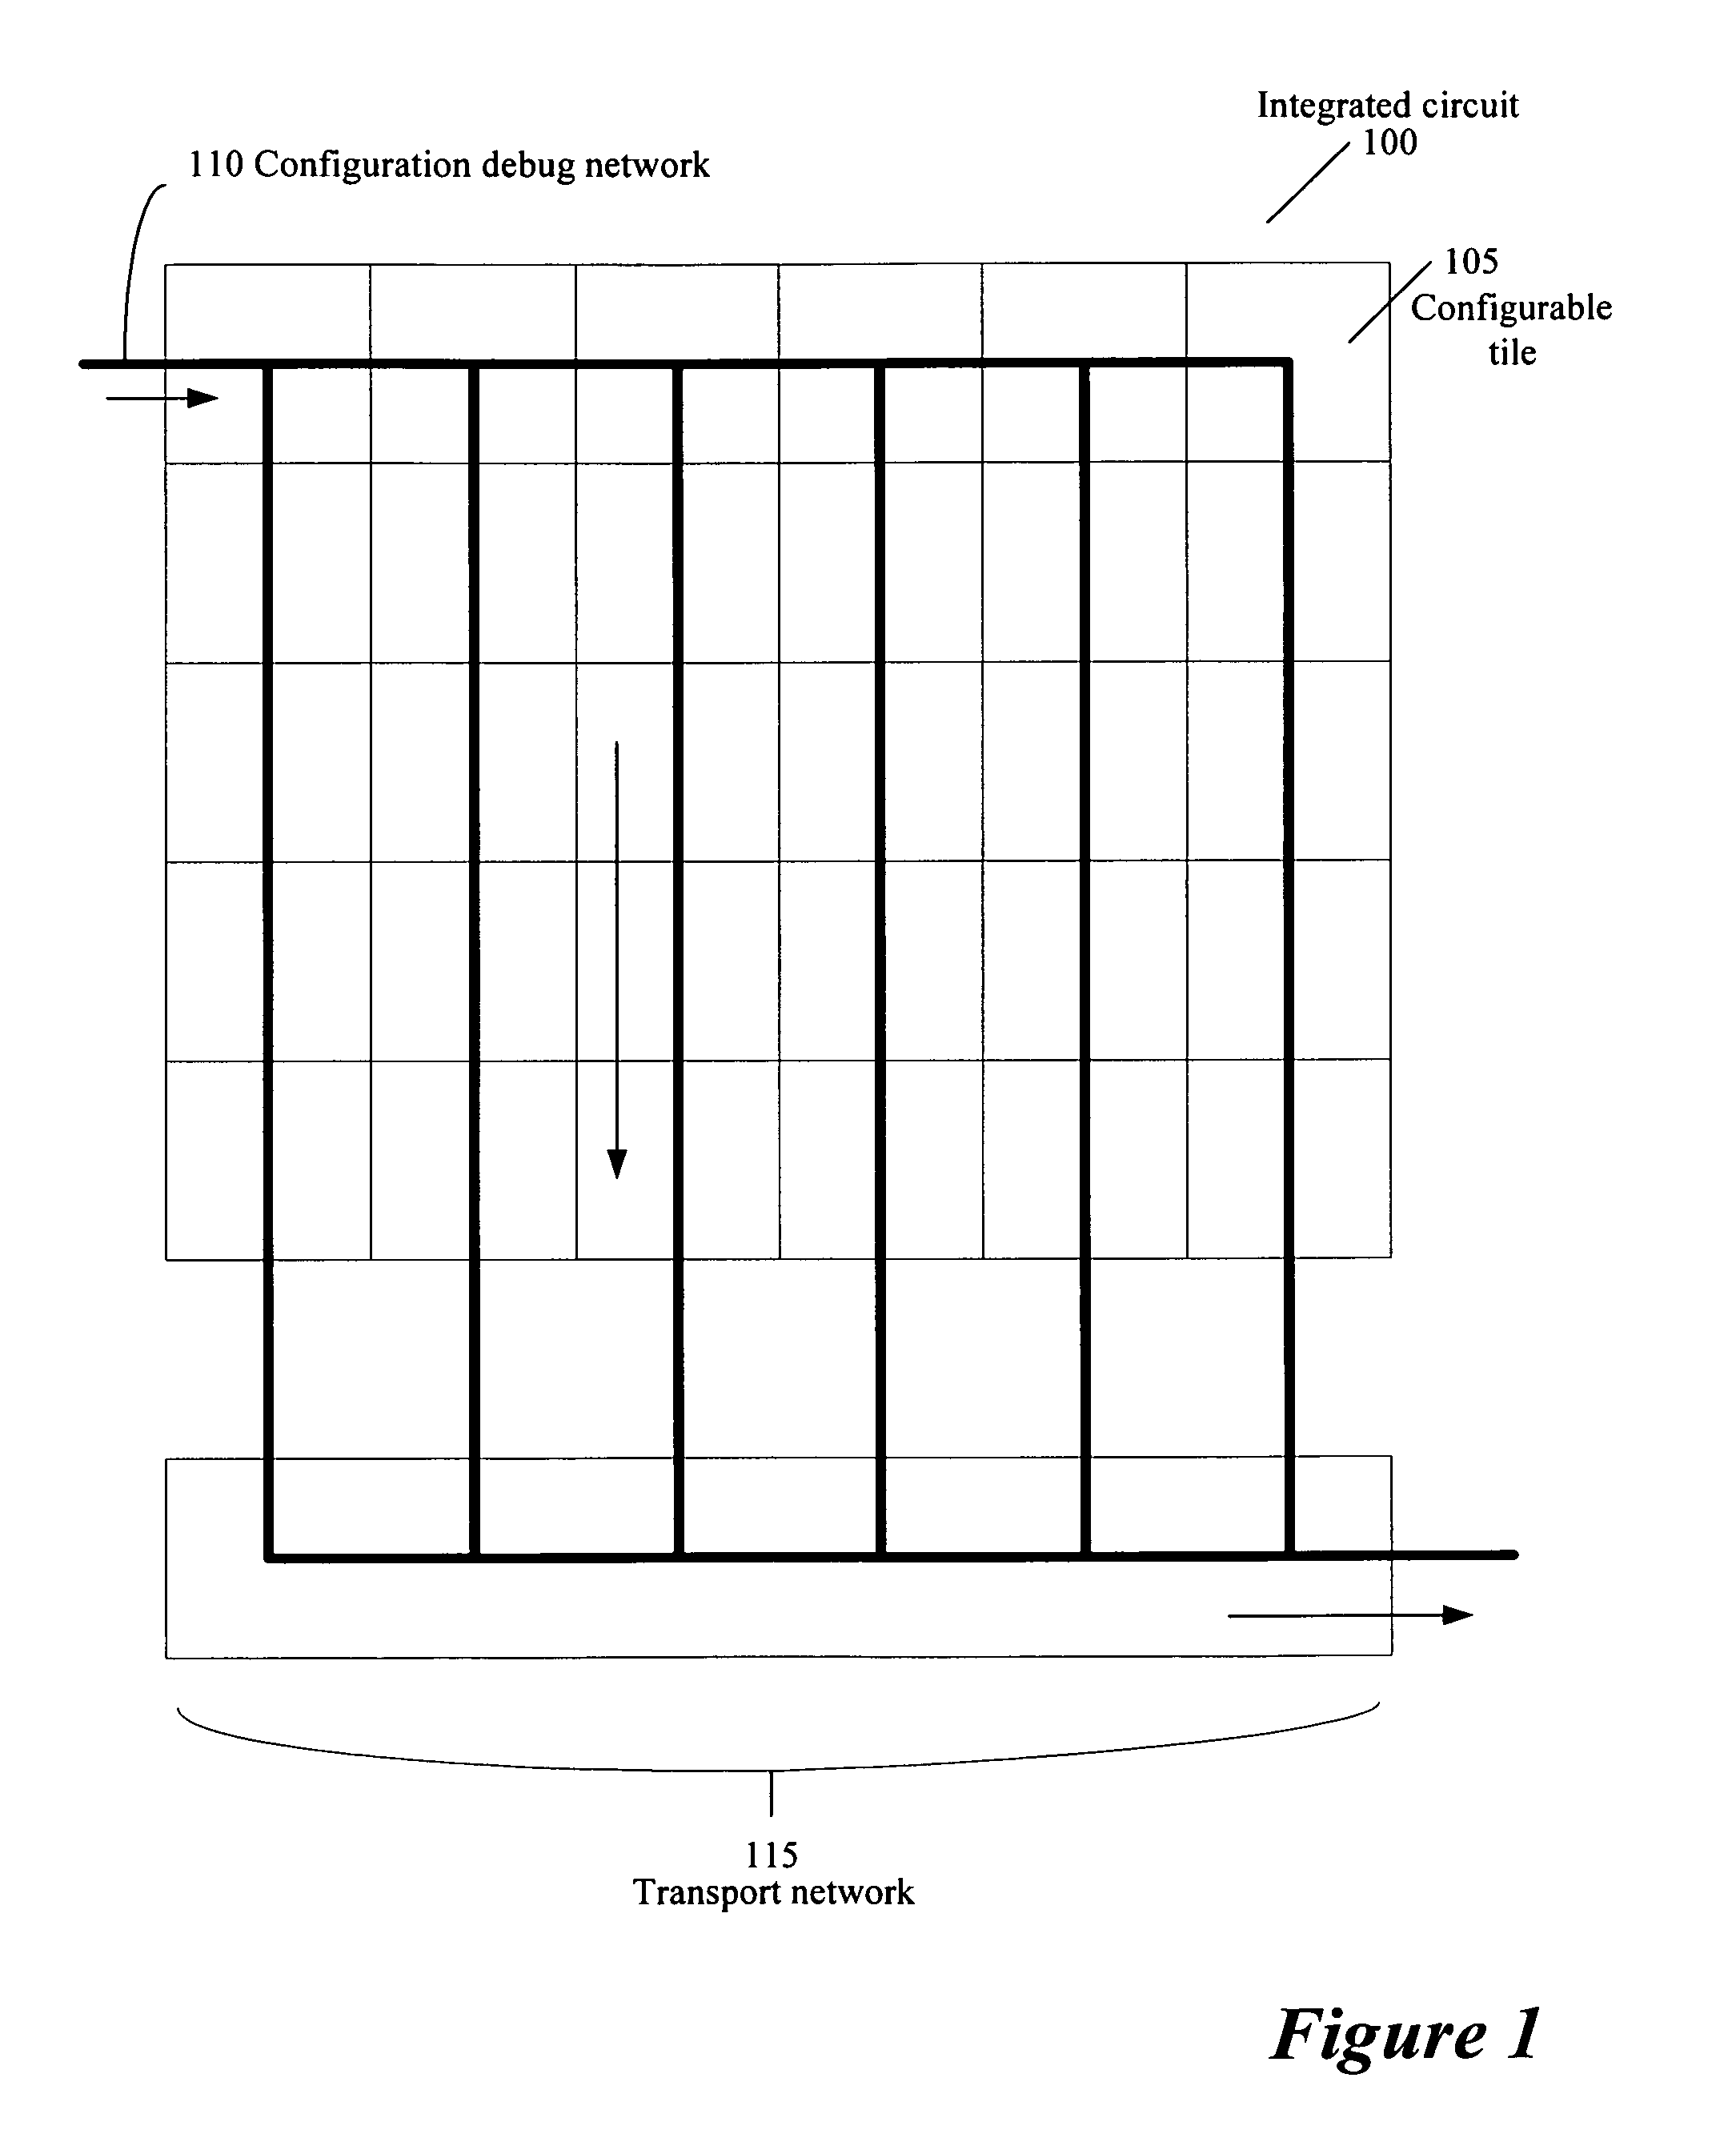 Restructuring data from a trace buffer of a configurable IC